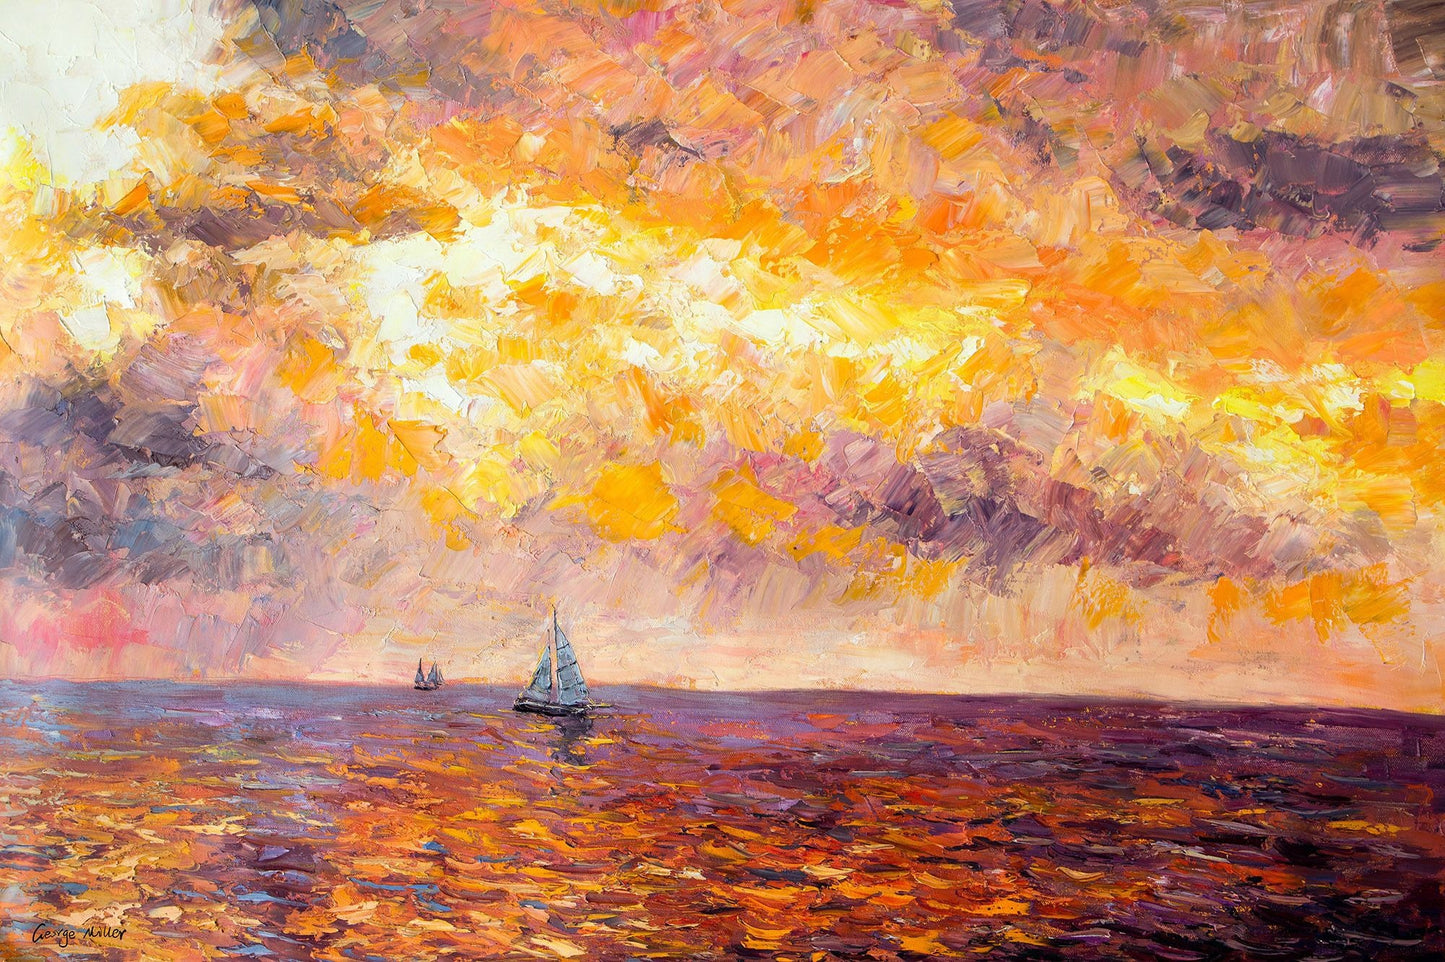 Large Oil Painting Sailboats at Sea Sunrise, Abstract Painting, Canvas Painting, Contemporary Art Living Room Decor, Large Seascape Painting